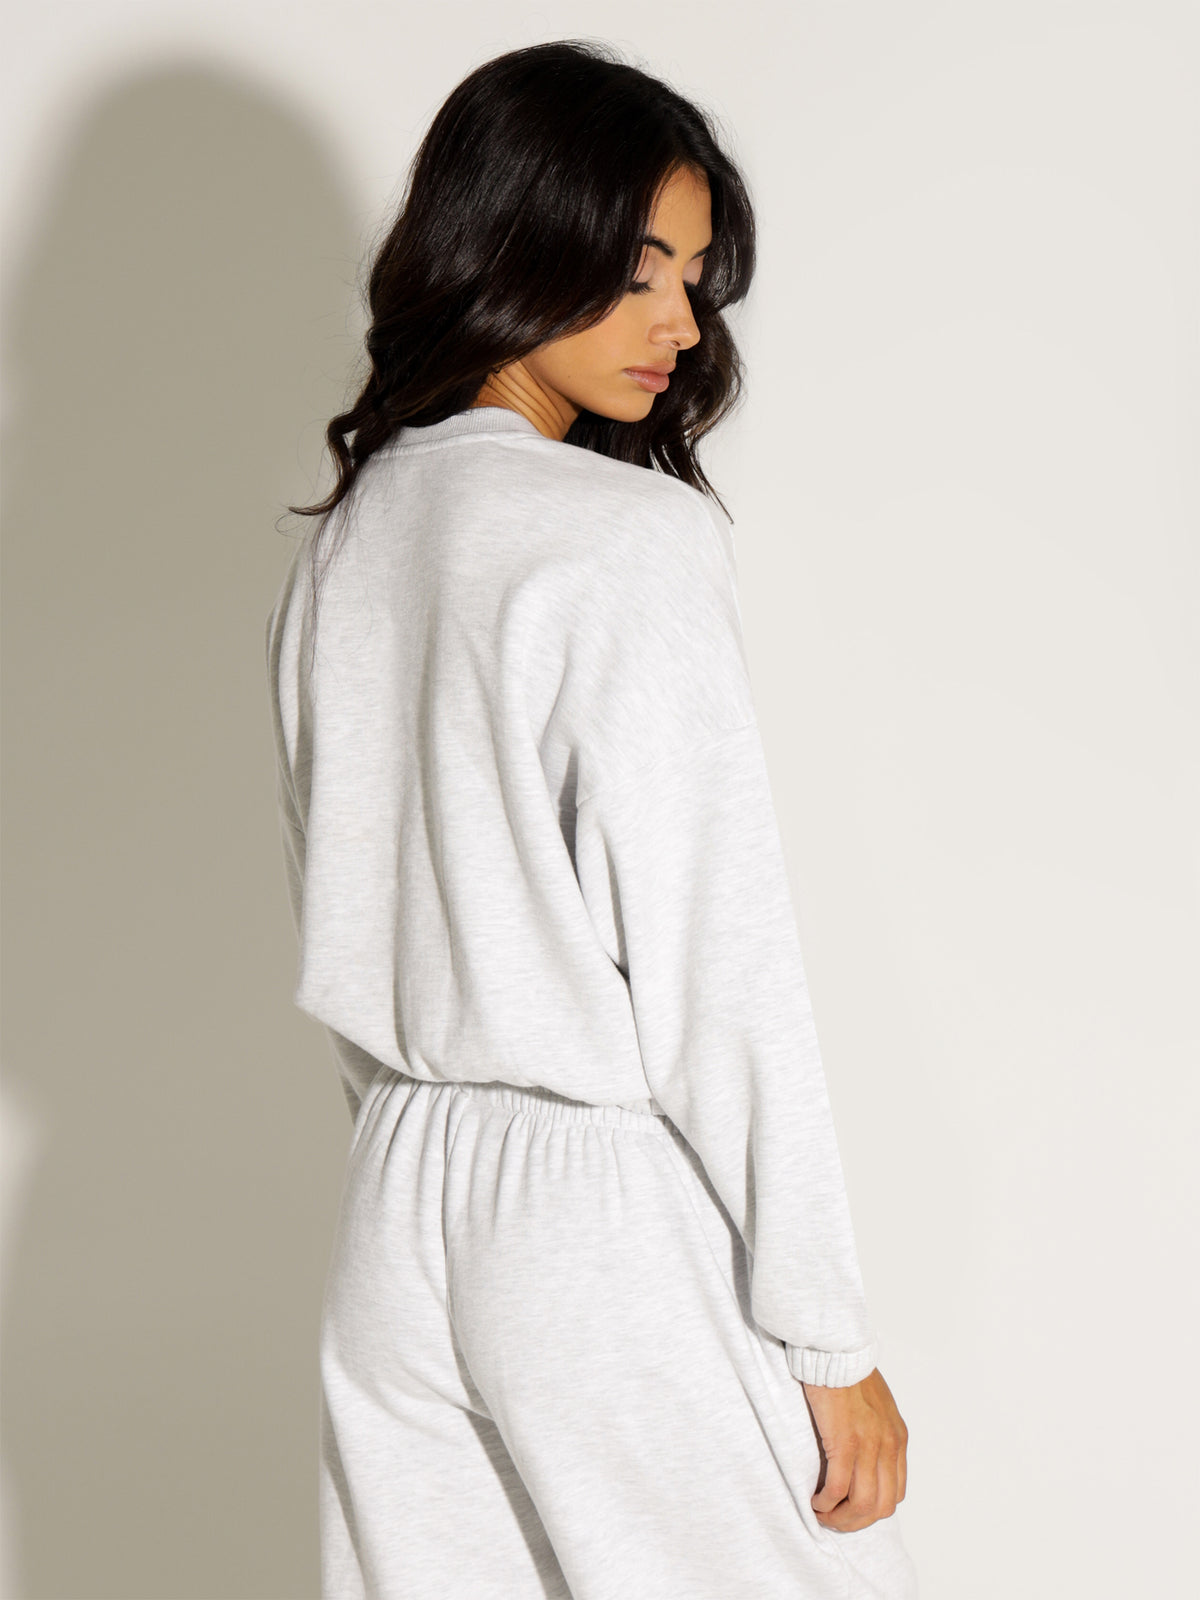 MSE Classic Sweater in Grey Marle